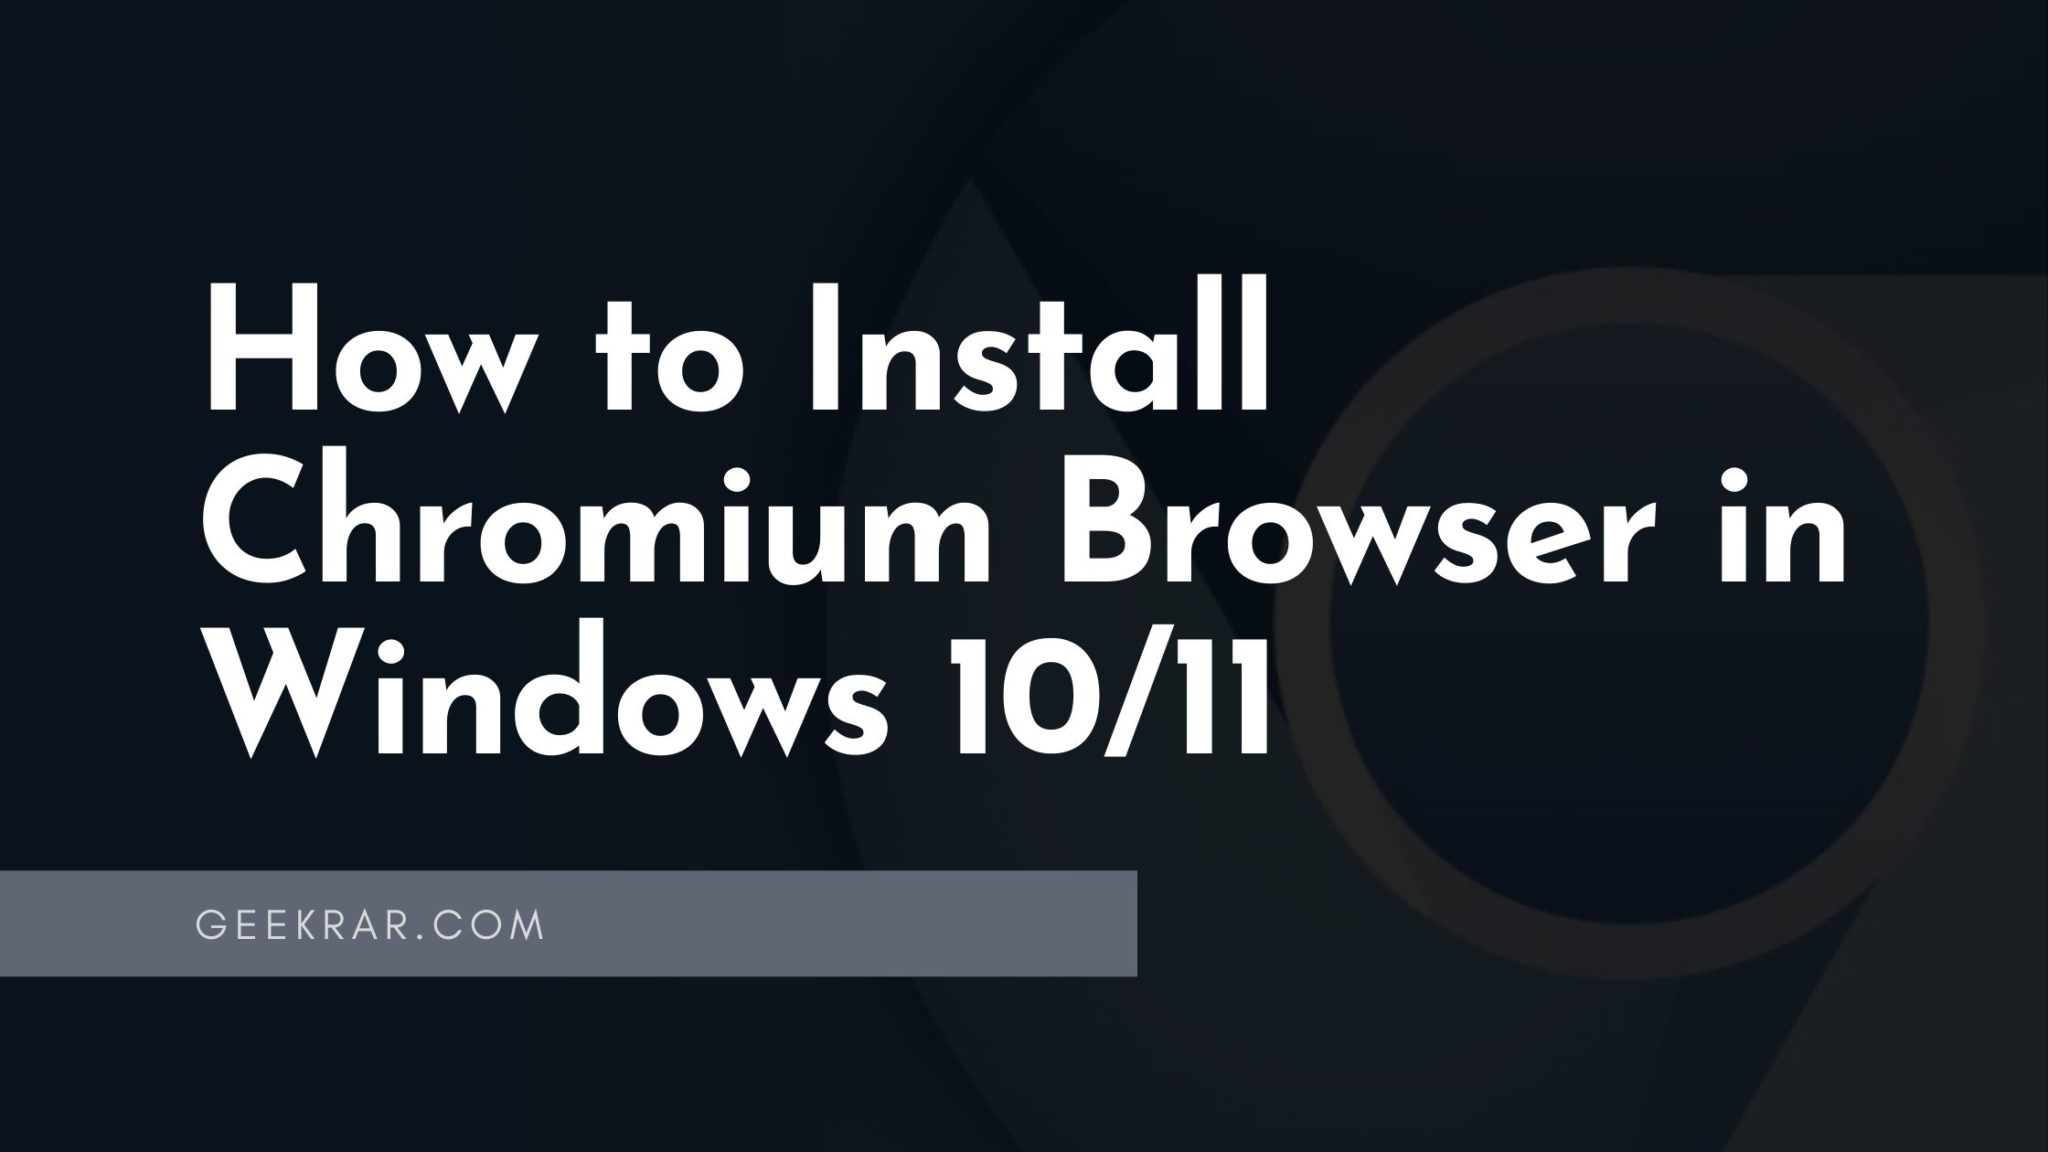 How to Install Chromium Browser in Windows 10/11